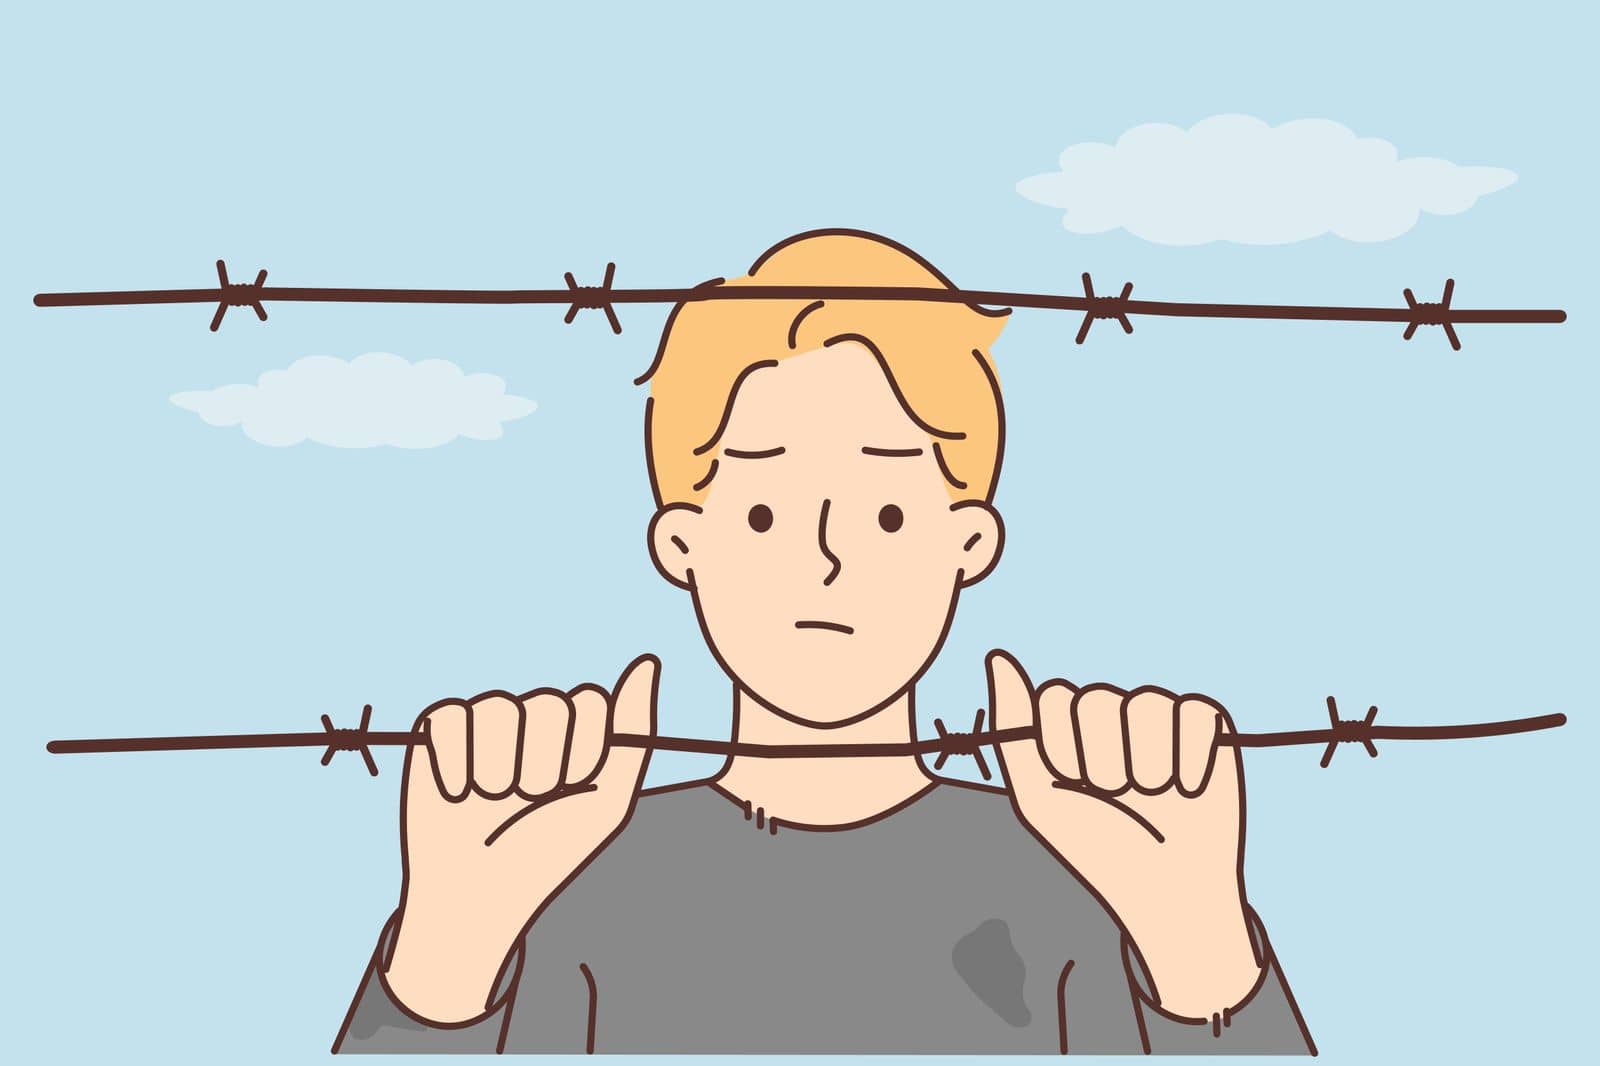 Unhappy young man behind wires in imprisonment. Upset male thief or criminal in prison dream of freedom. Crime and punishment. Vector illustration.